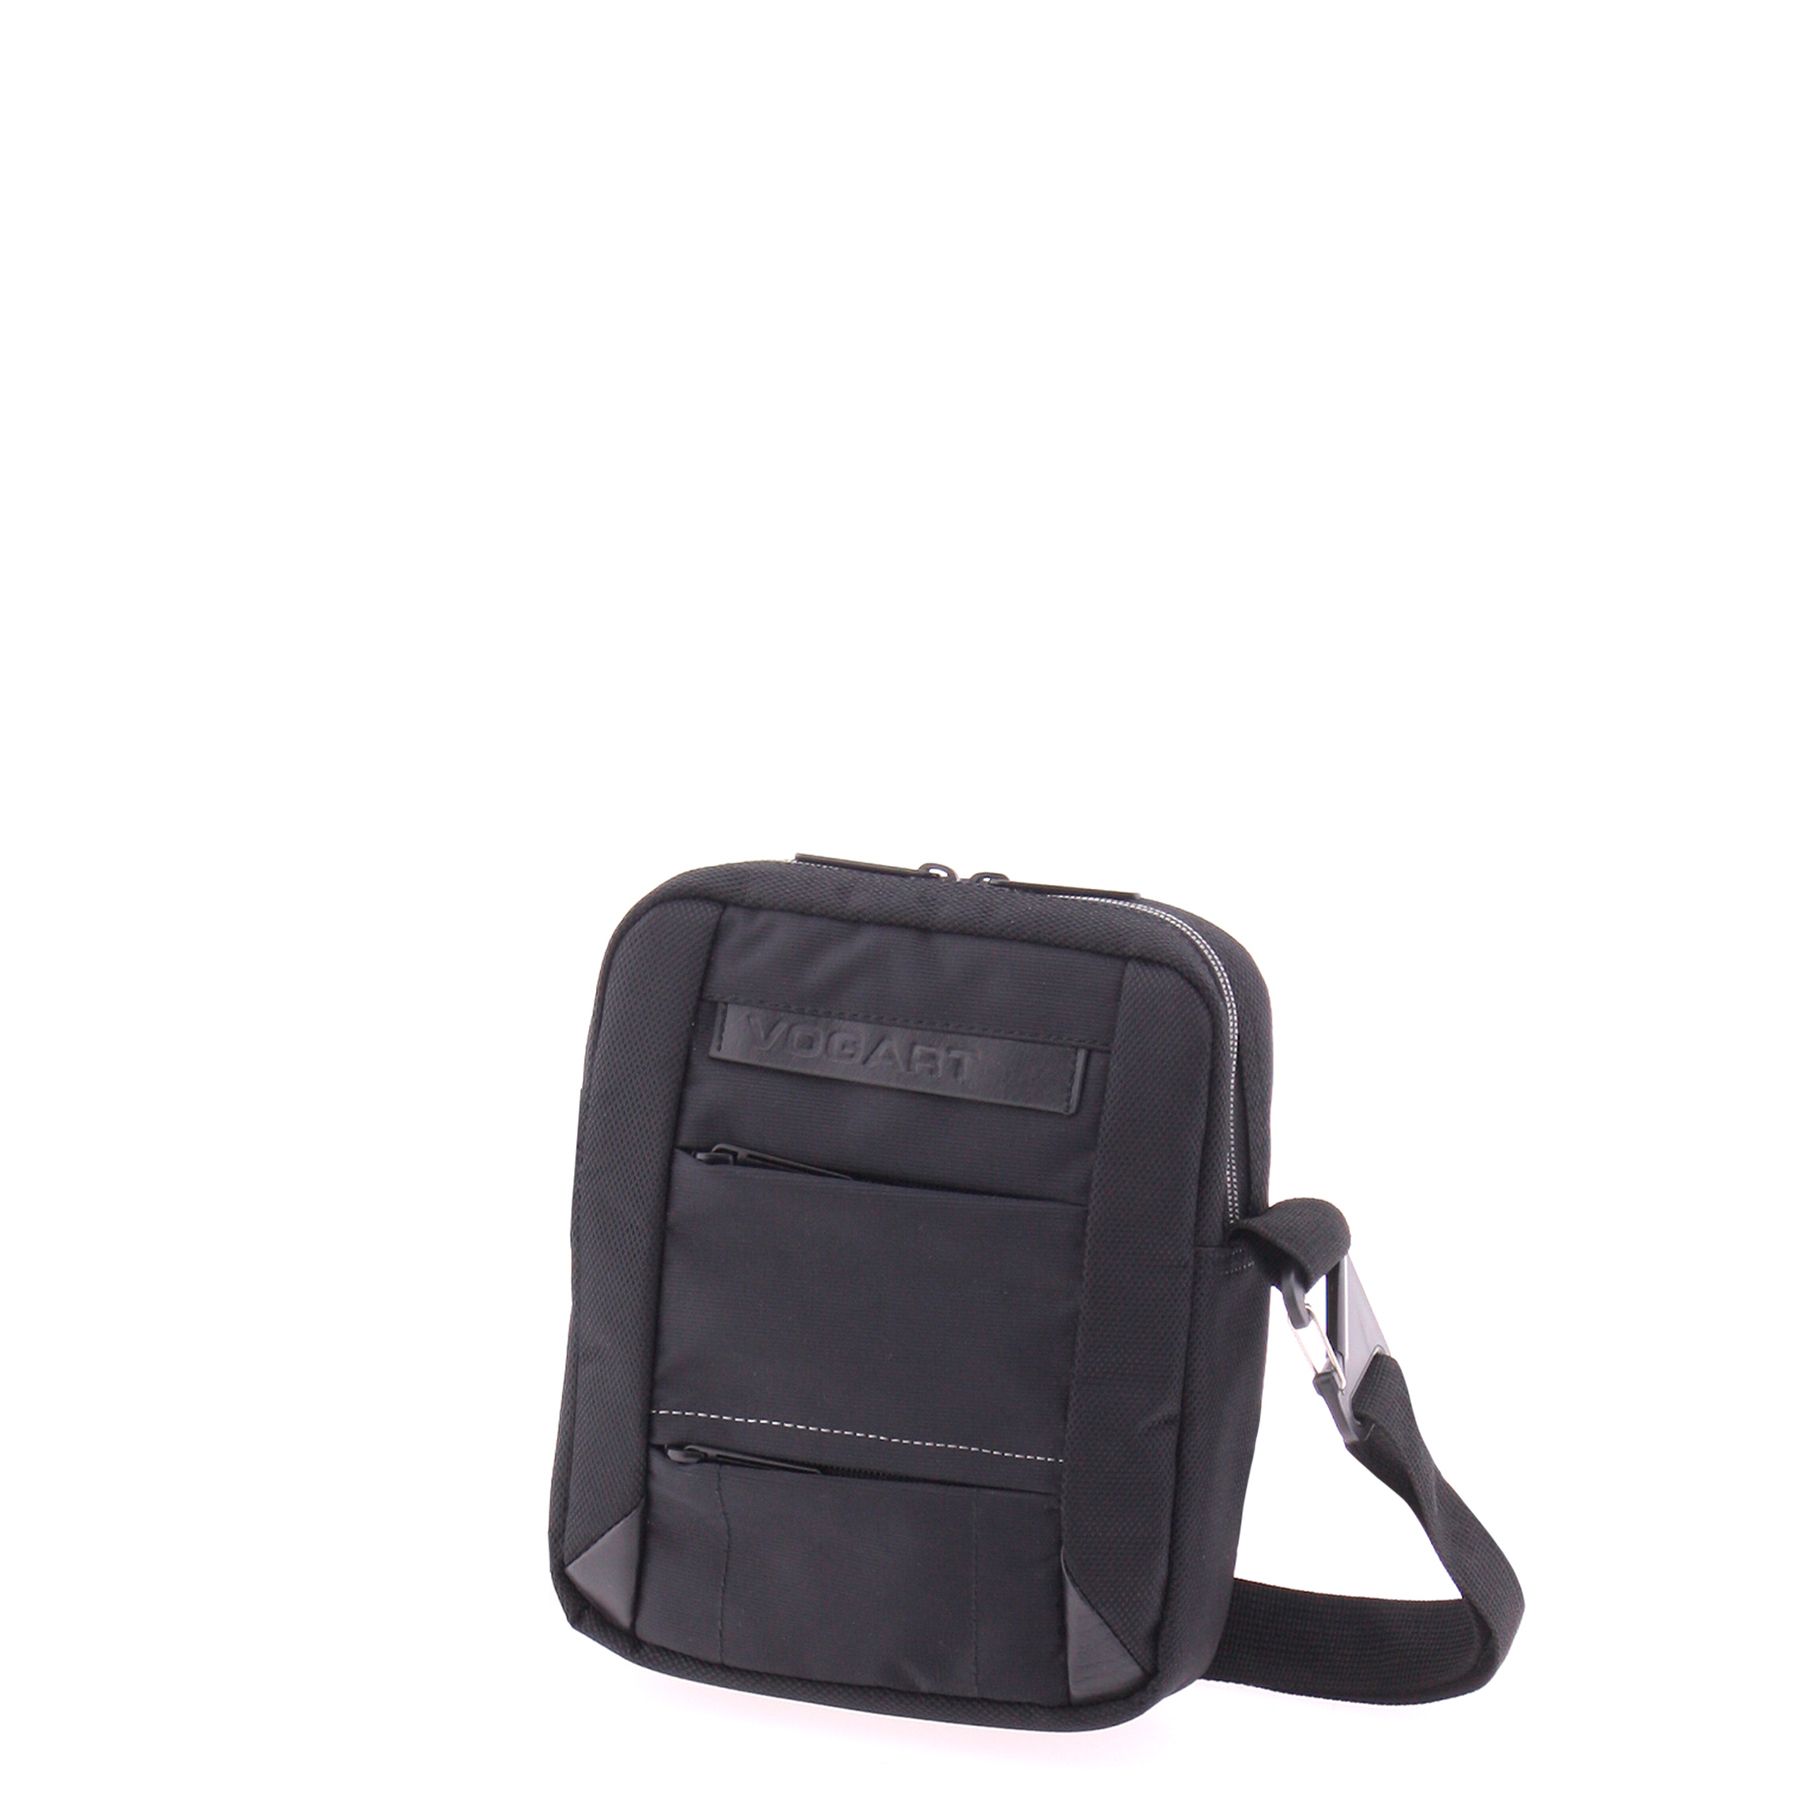 Summit | VOGART Bags Official - Fashion backpacks